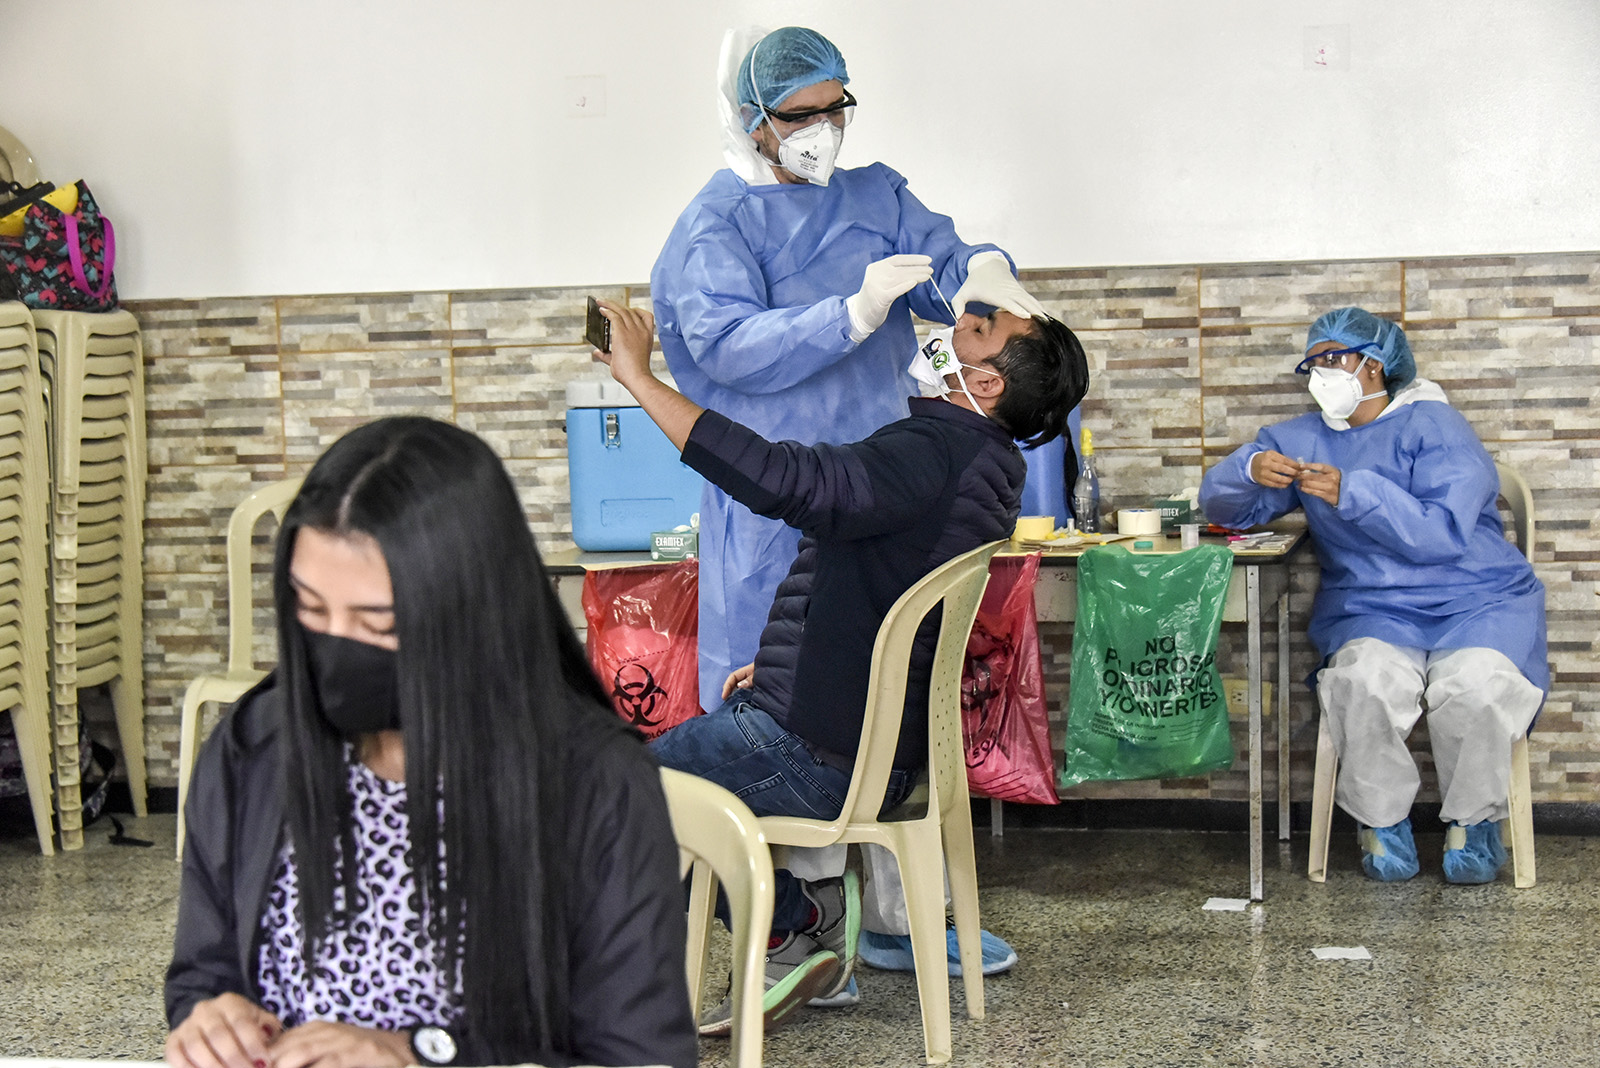 A medical worker takes a swab sample from a person to test for the novel coronavirus (COVID-19) on July 29, in Bogota, Colombia.